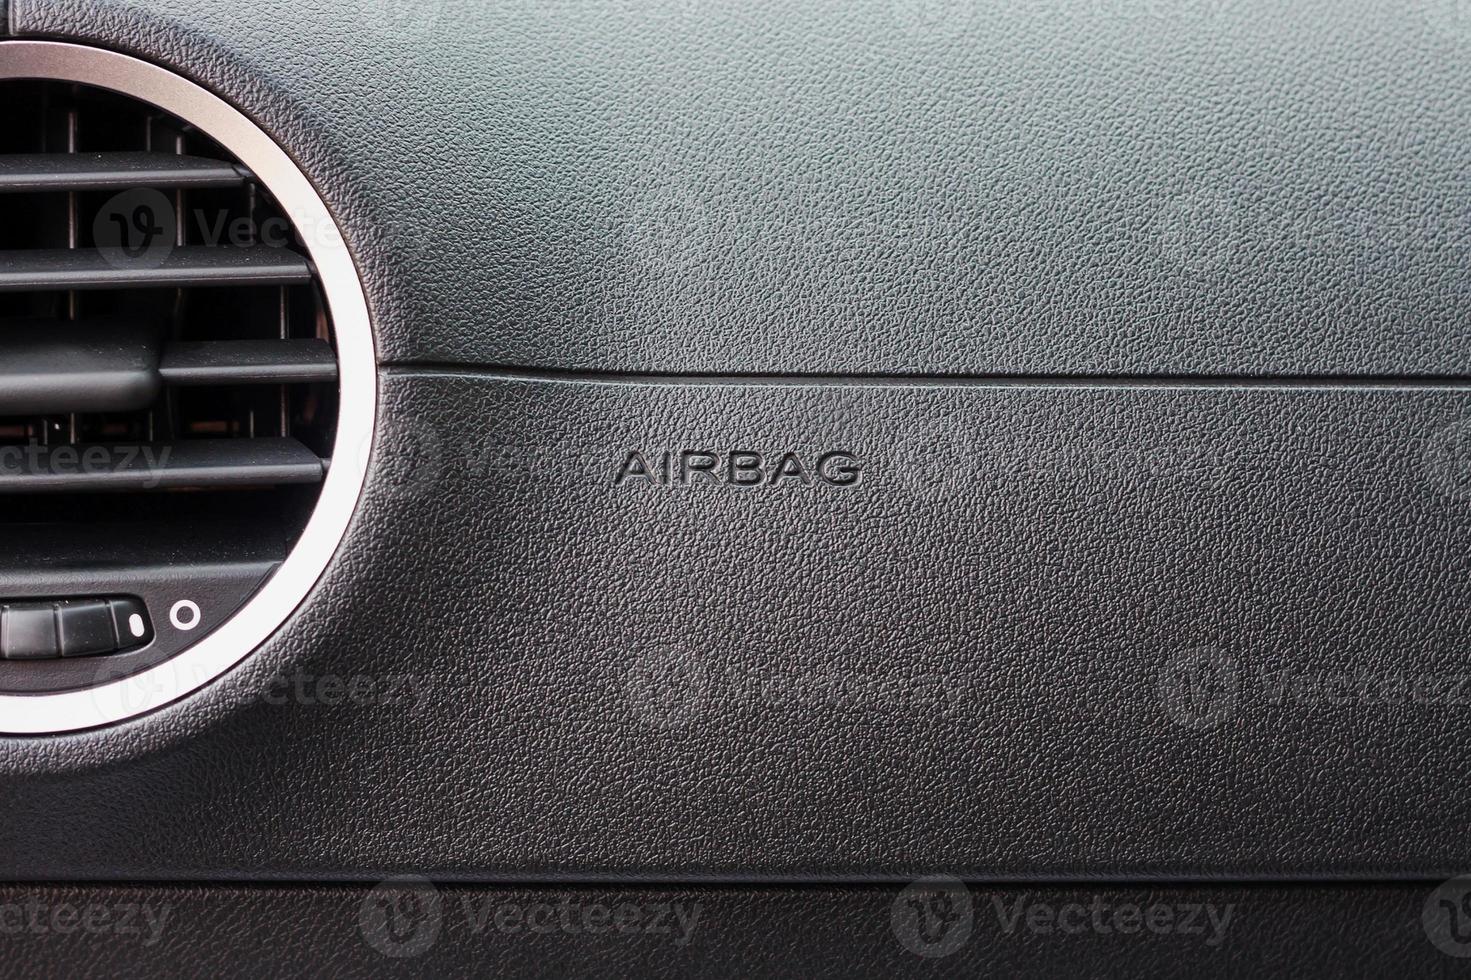 airbag sign in the car photo